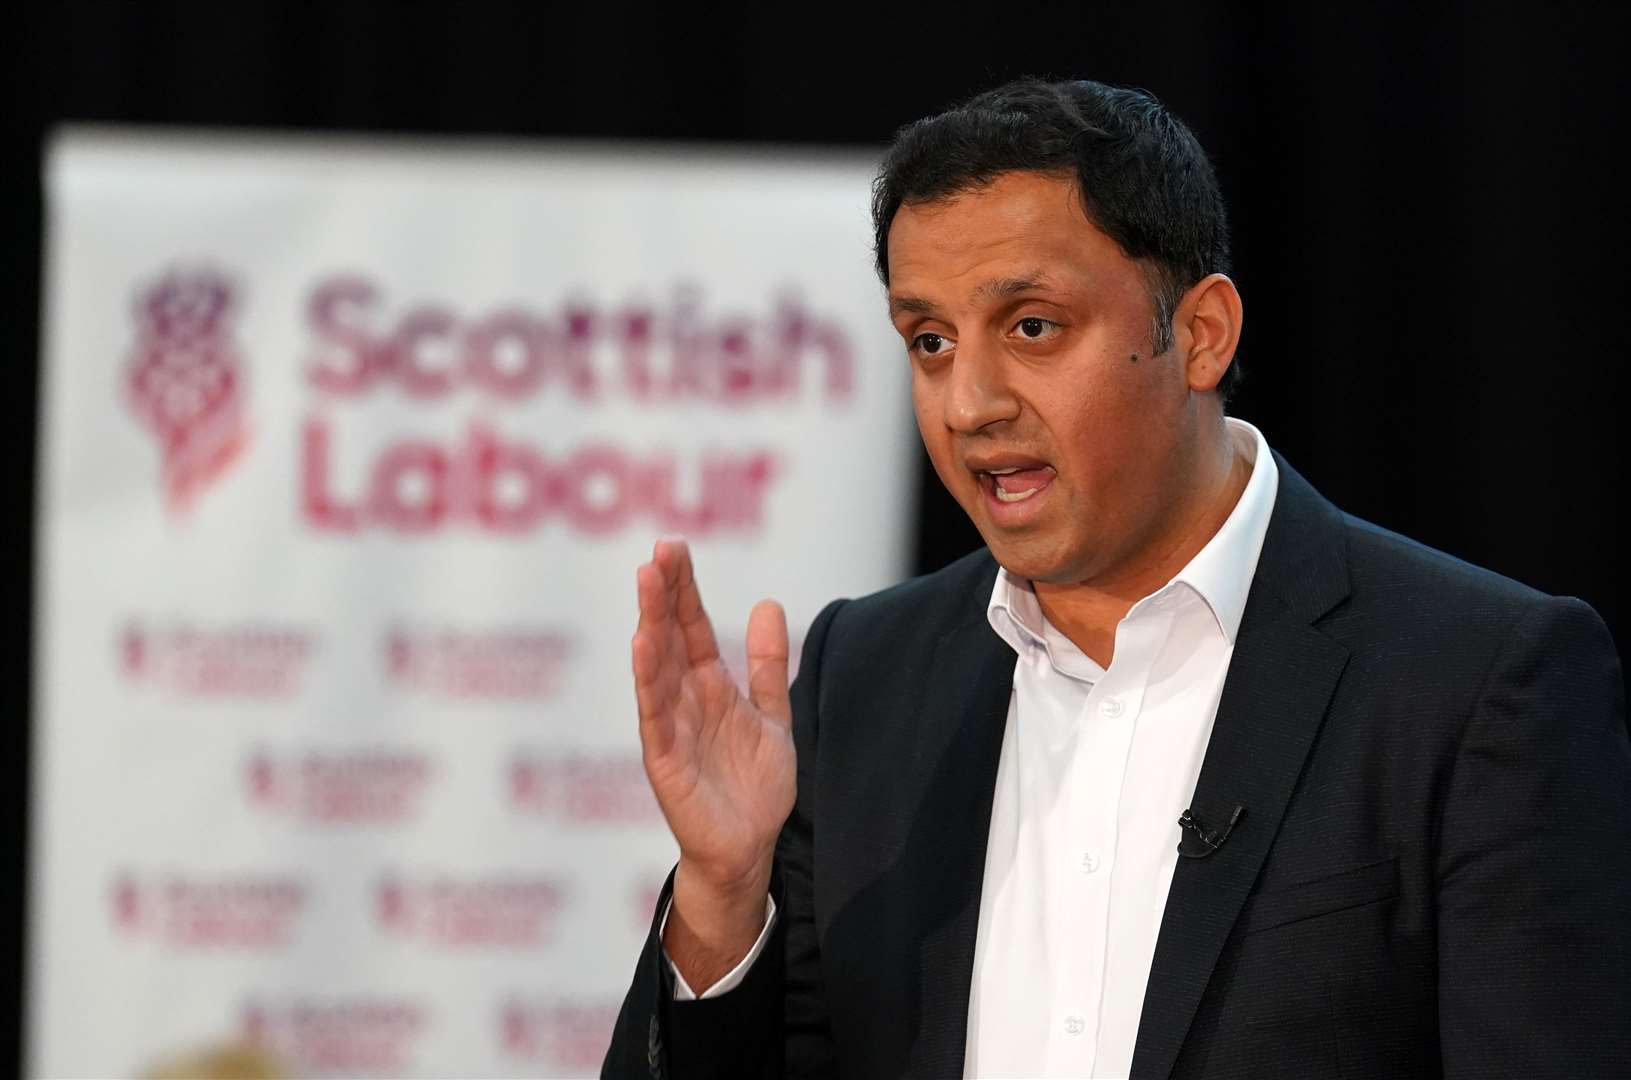 Scottish Labour leader Anas Sarwar accused the First Minister of pushing ahead with an ‘unwanted referendum’ (Andrew Milligan/PA)